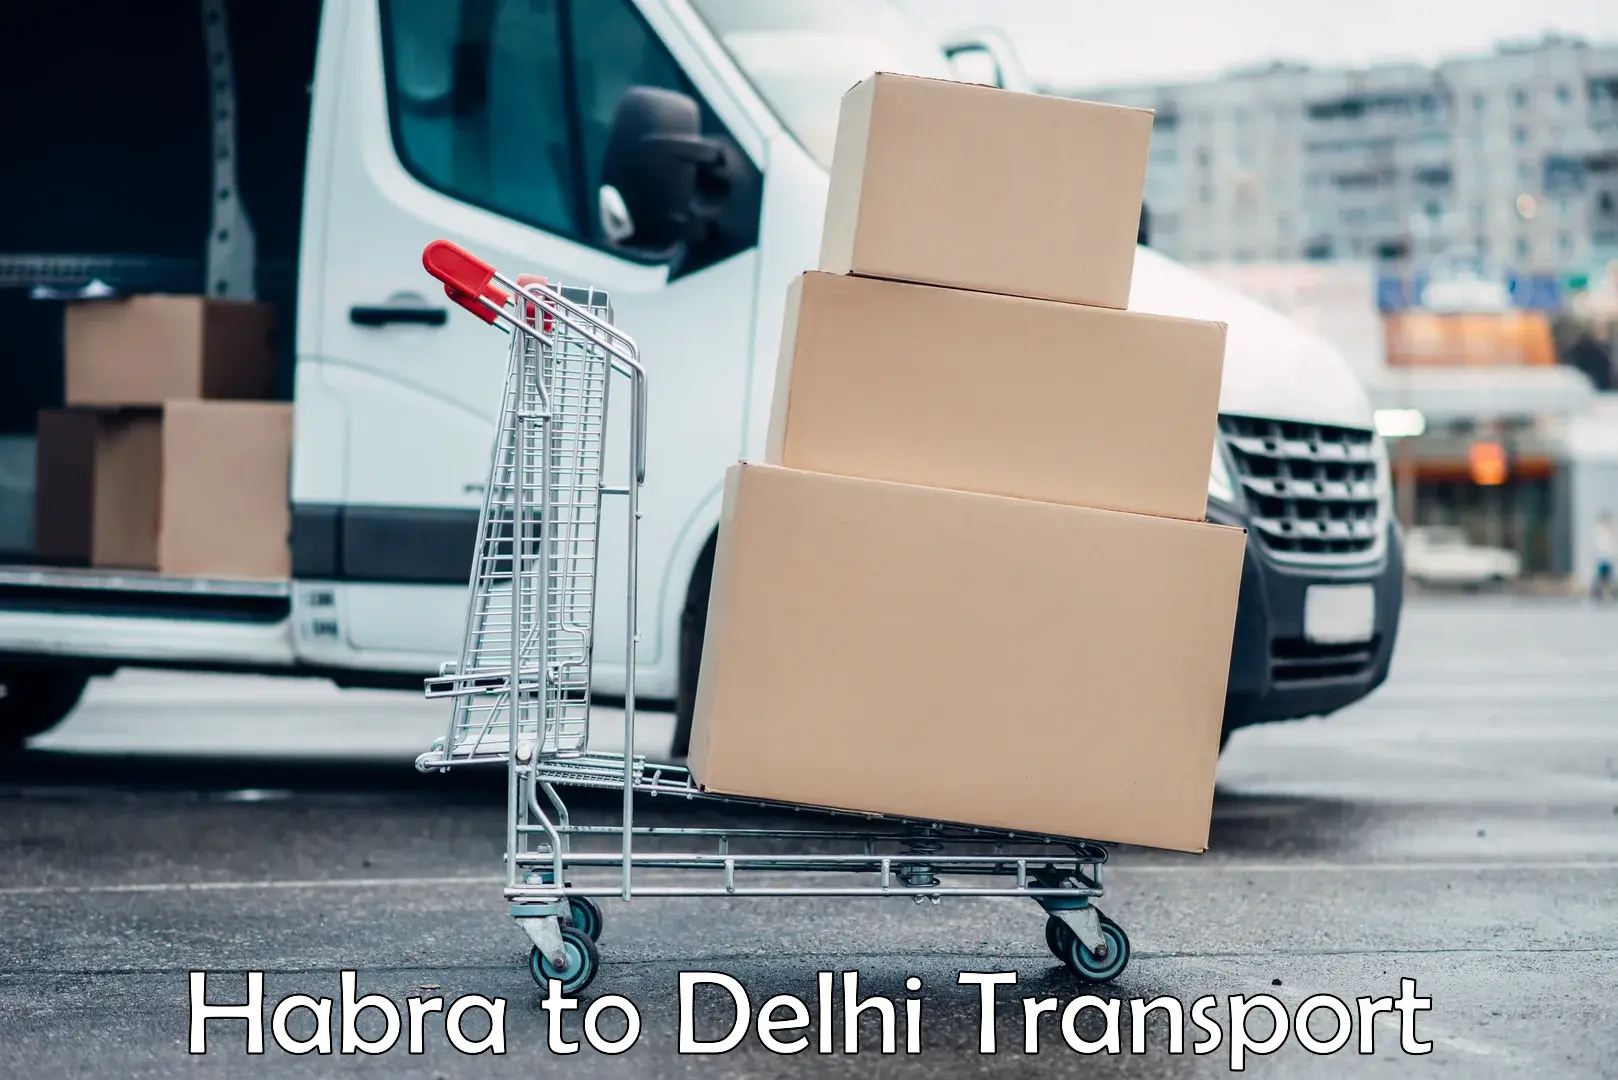 Truck transport companies in India Habra to Lodhi Road